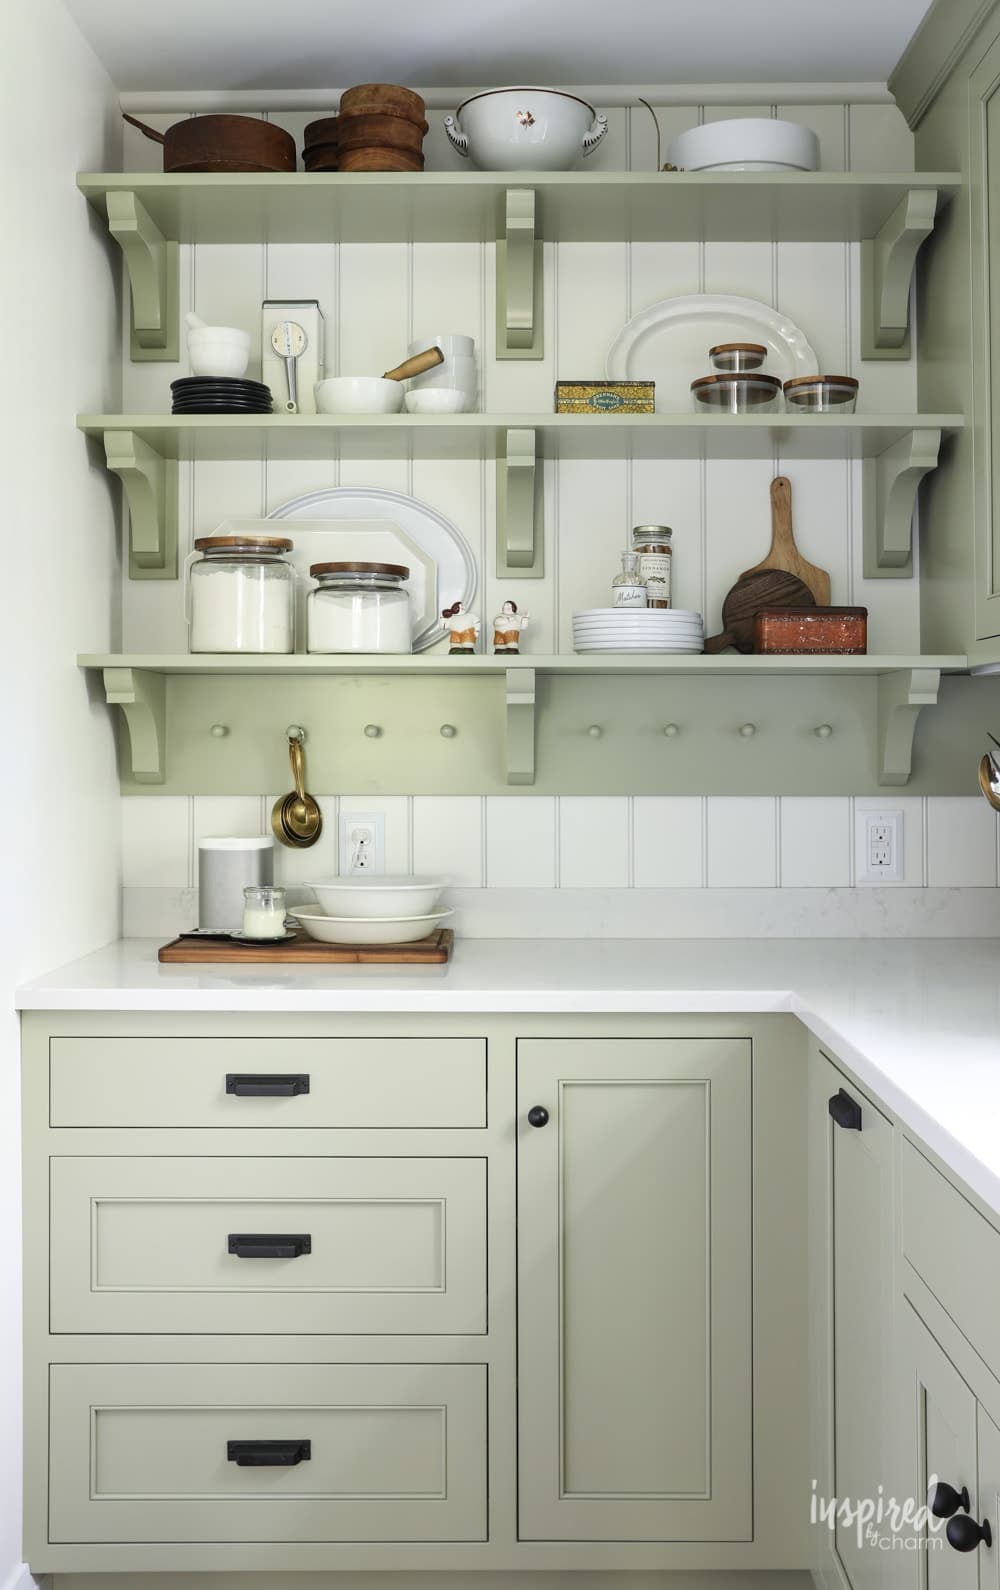 Kitchen cabinets and open shelving in Sage by Sherwin Williams.